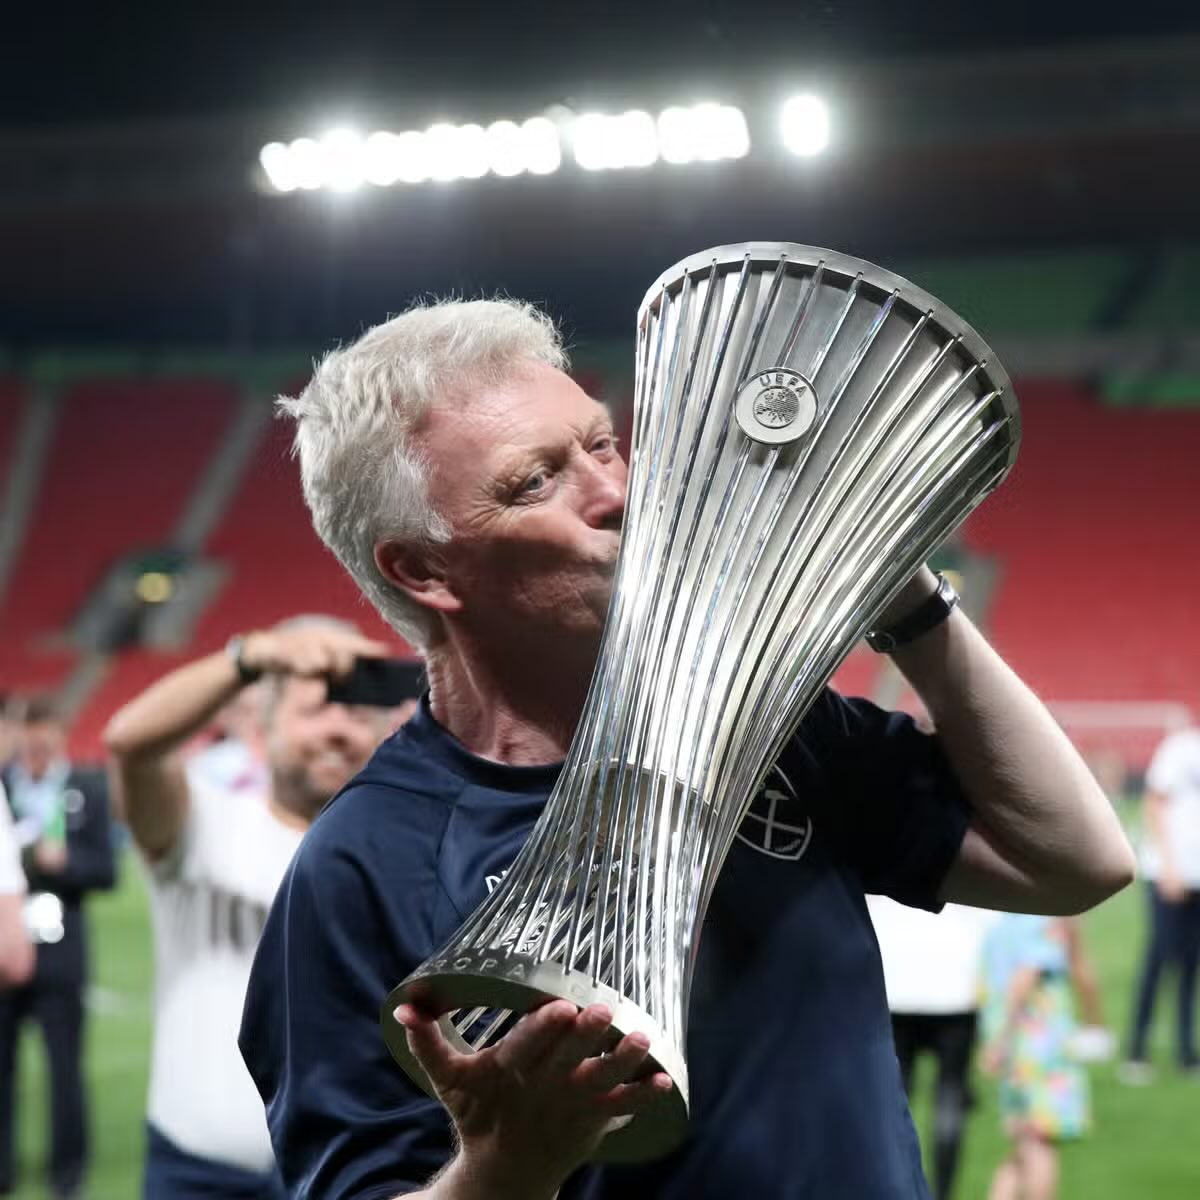 From that magical night against Sevilla, Lyon away and delivering a European trophy in Prague. David Moyes will be remembered as one of West Ham’s greatest recent managers.

From the bottom of my heart, thank you.